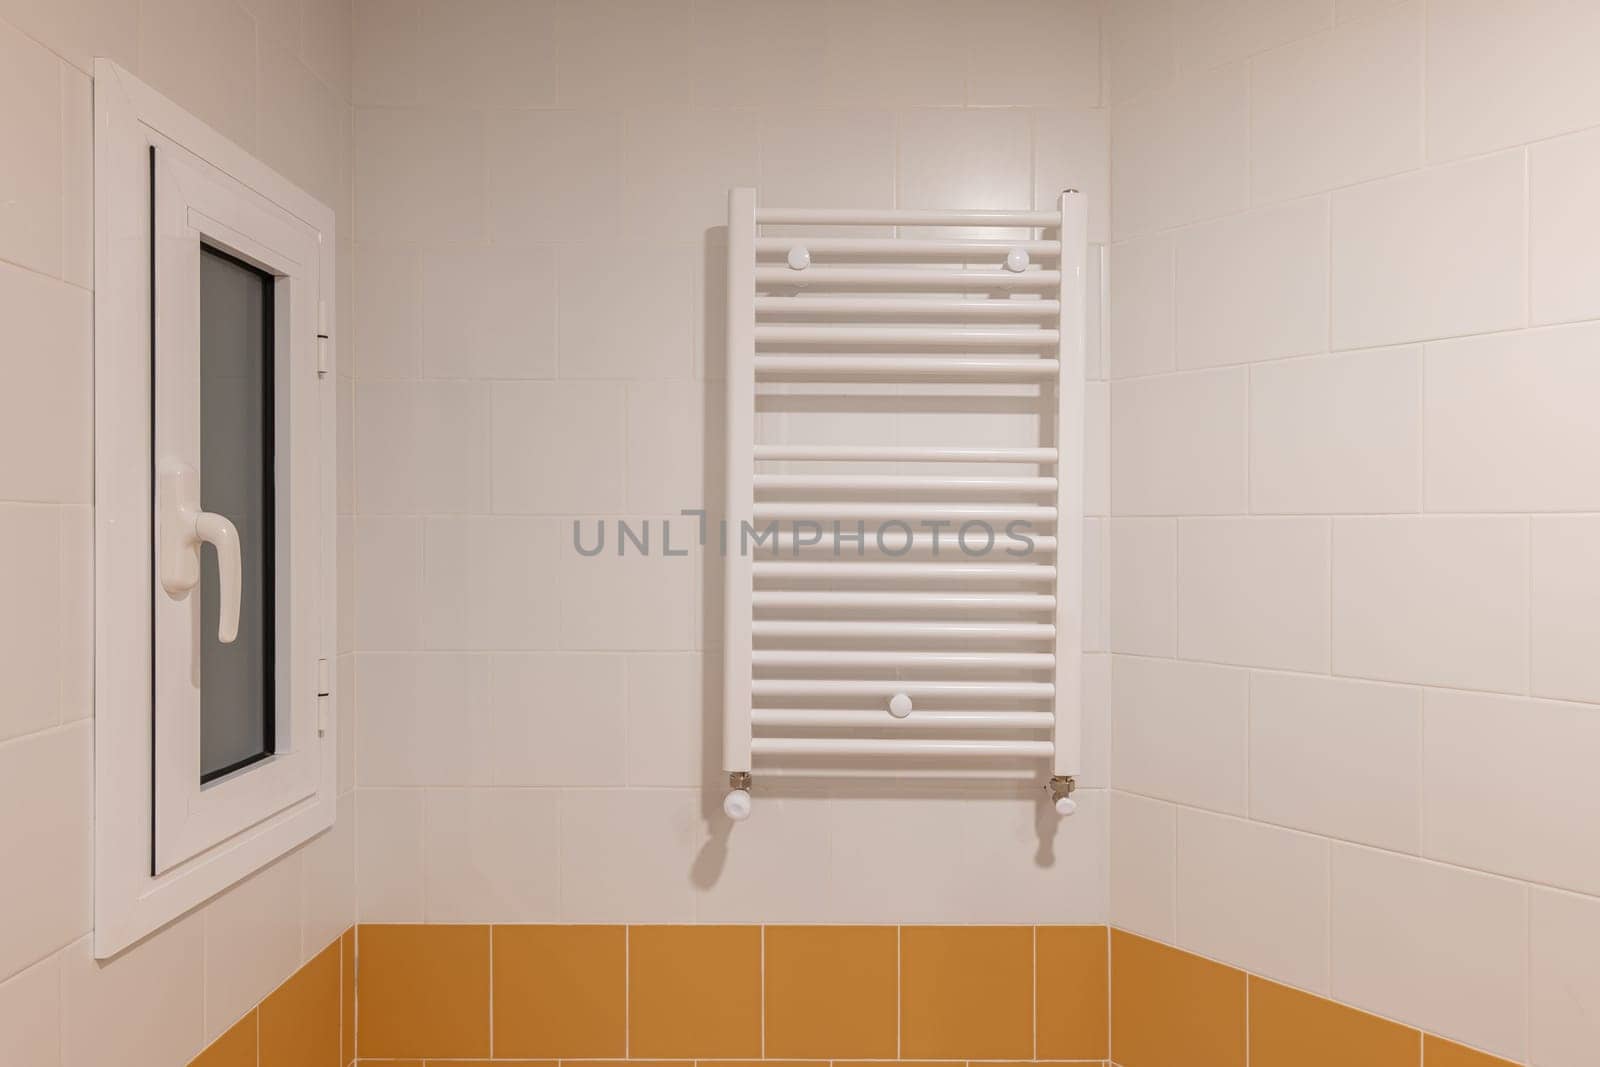 A modern bathroom with orange tiles and white fixtures